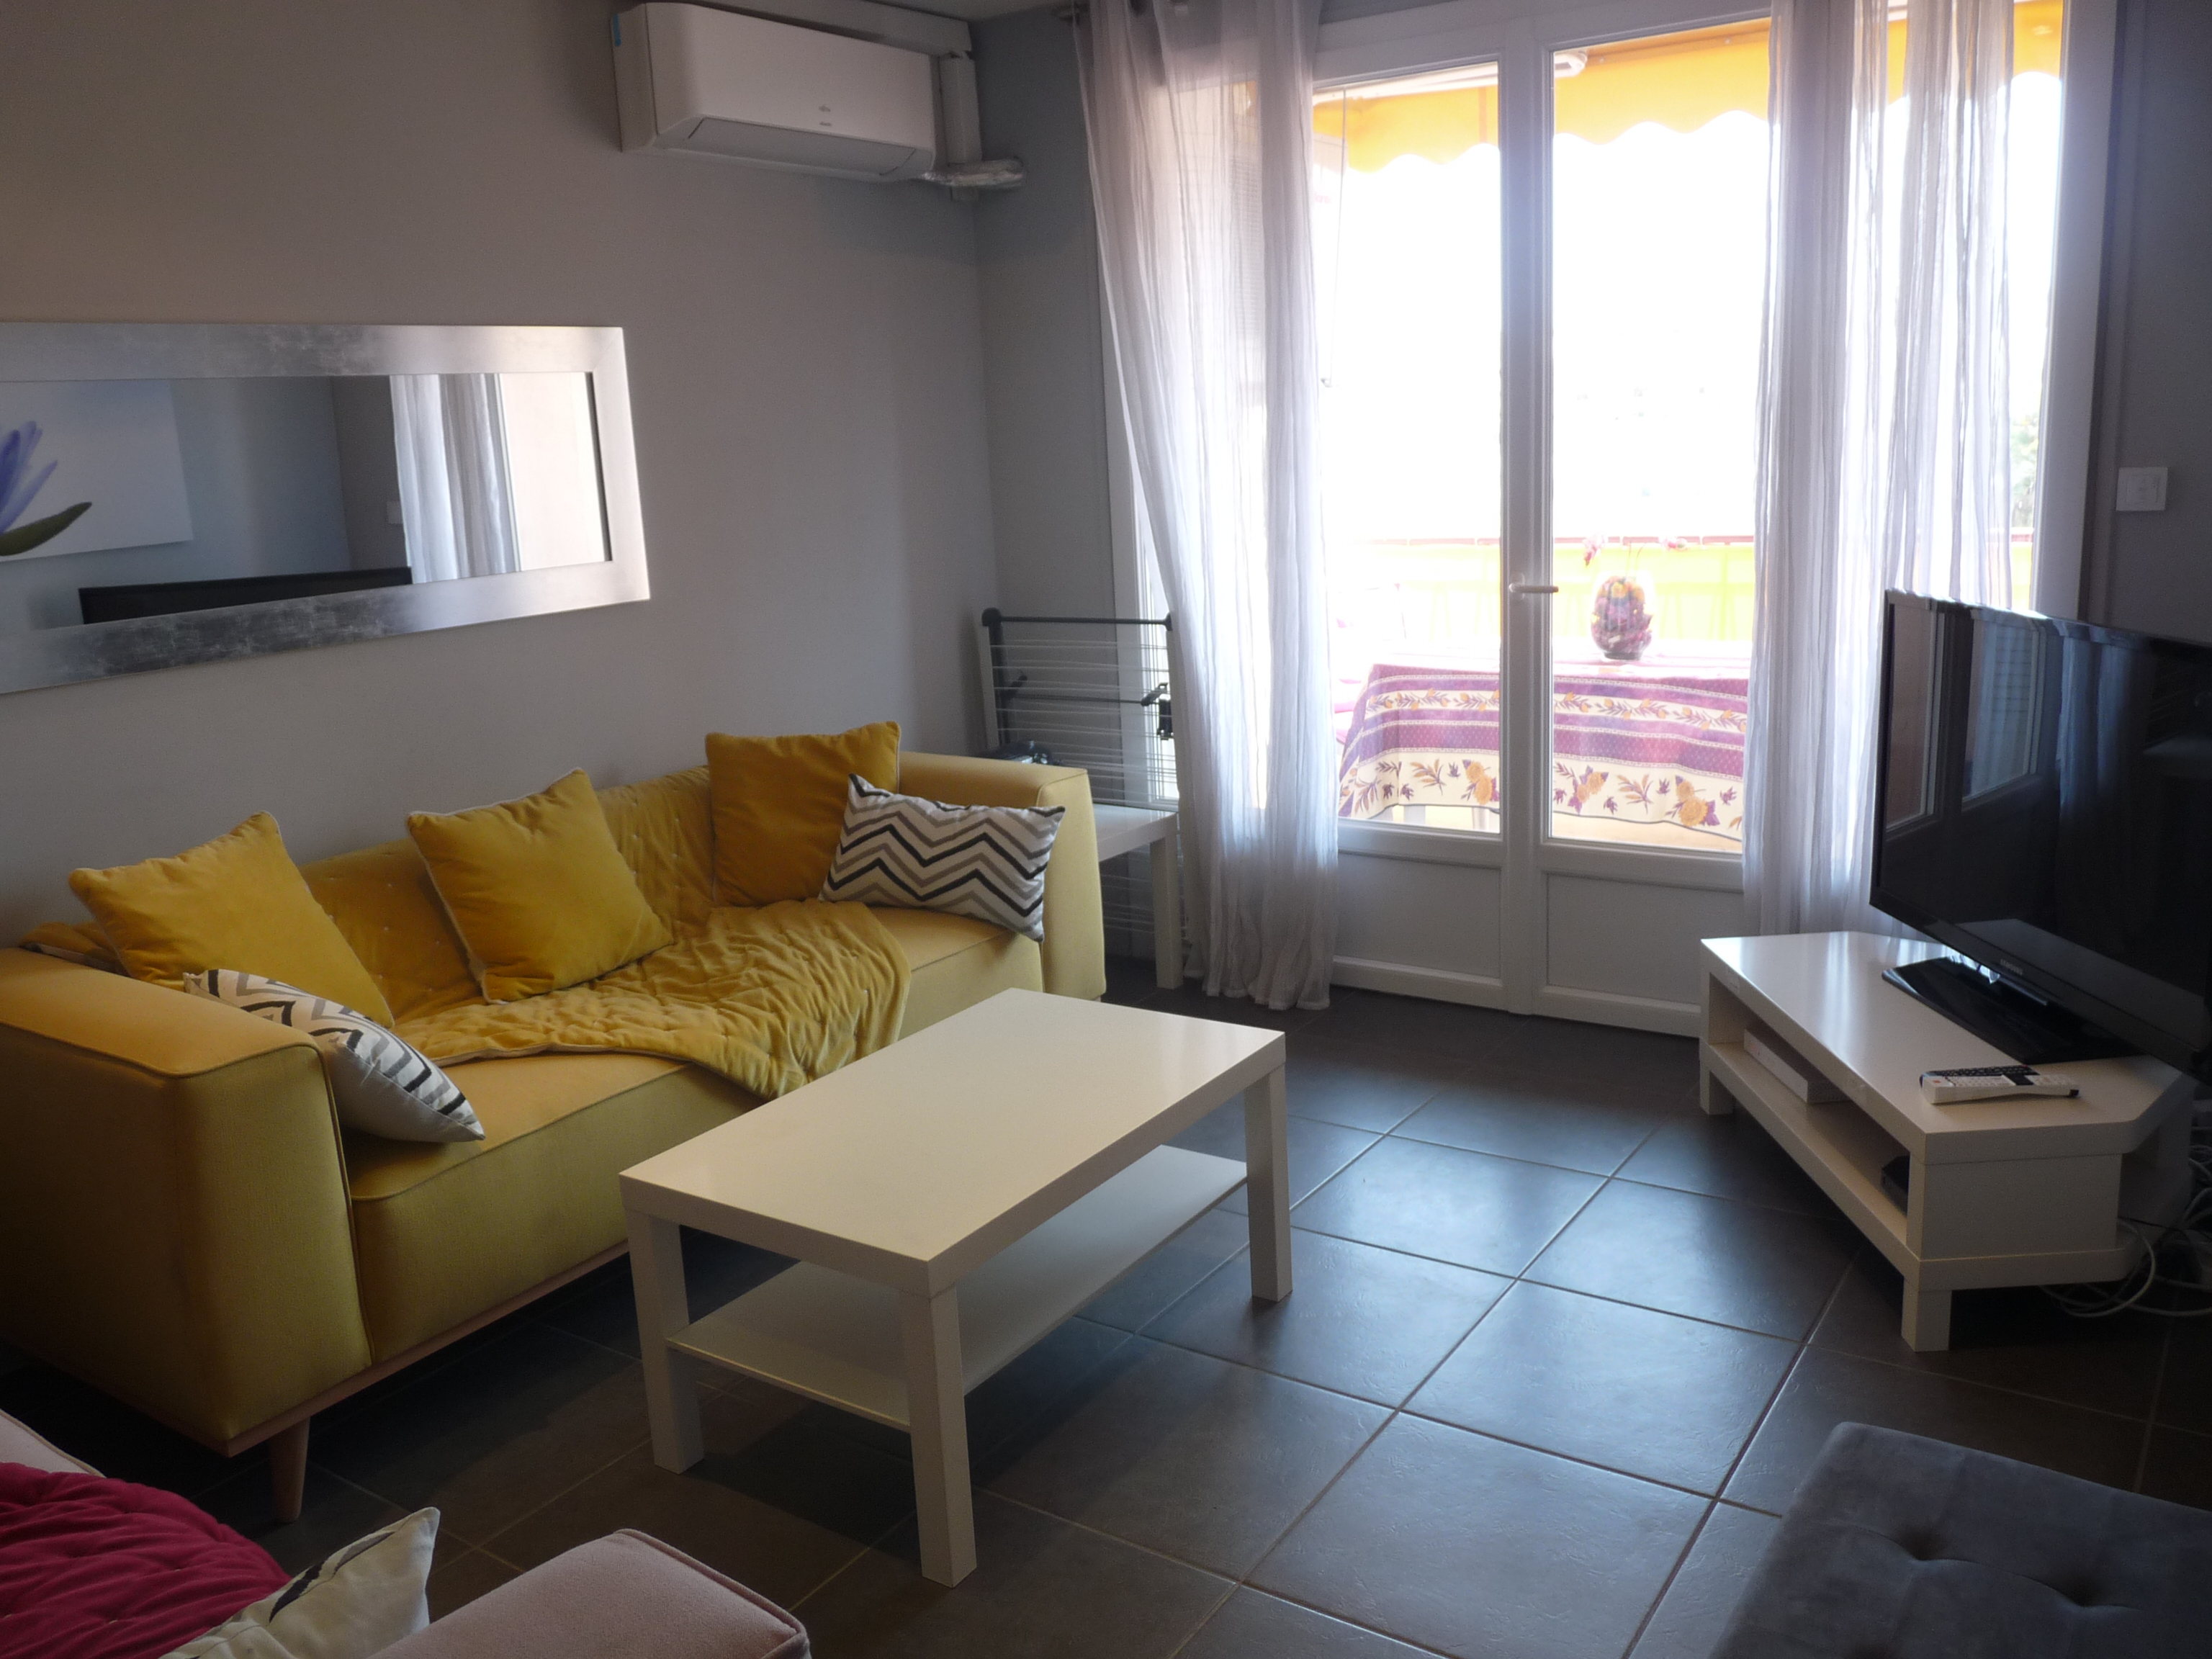 Modern two bedroom accommodation in the center of Cannes, next to the Croisette and the Palais. - 1455